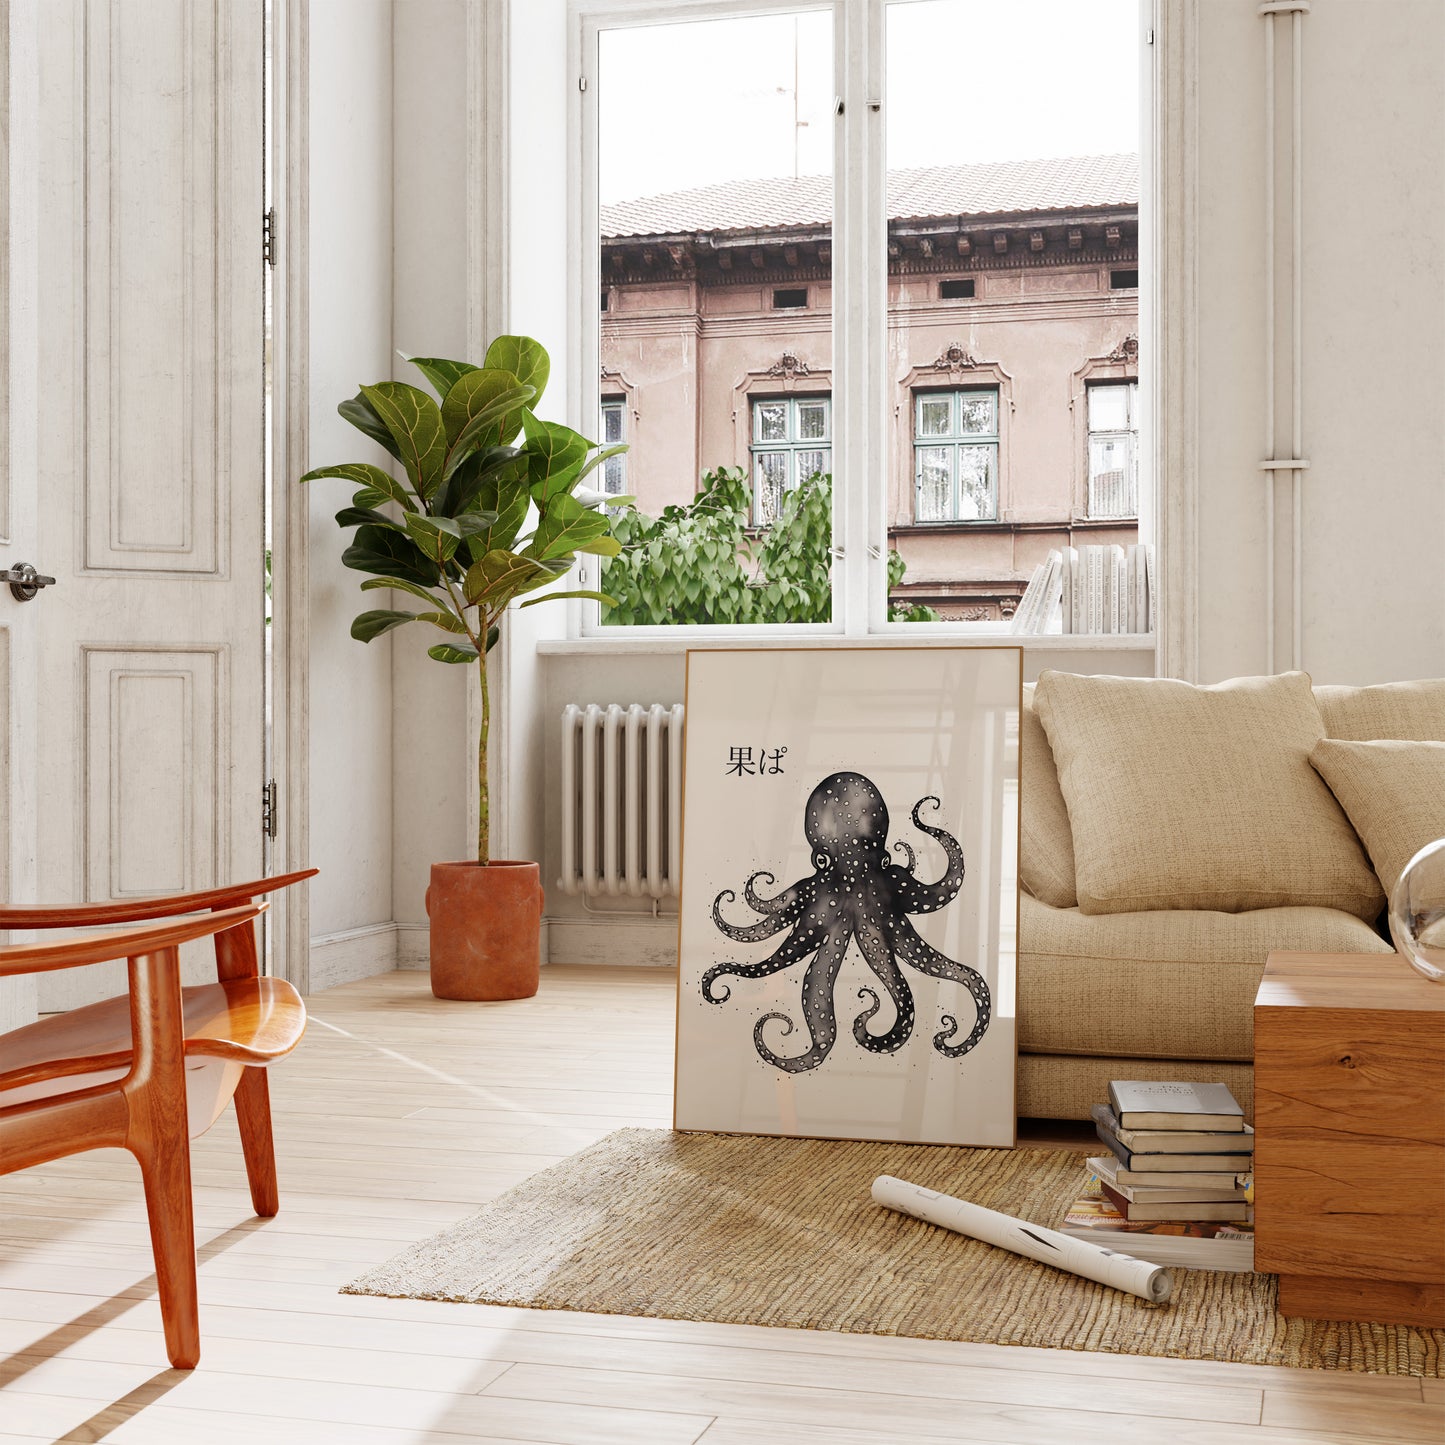 A cozy living room with a poster of an octopus on the floor leaning against a wall.